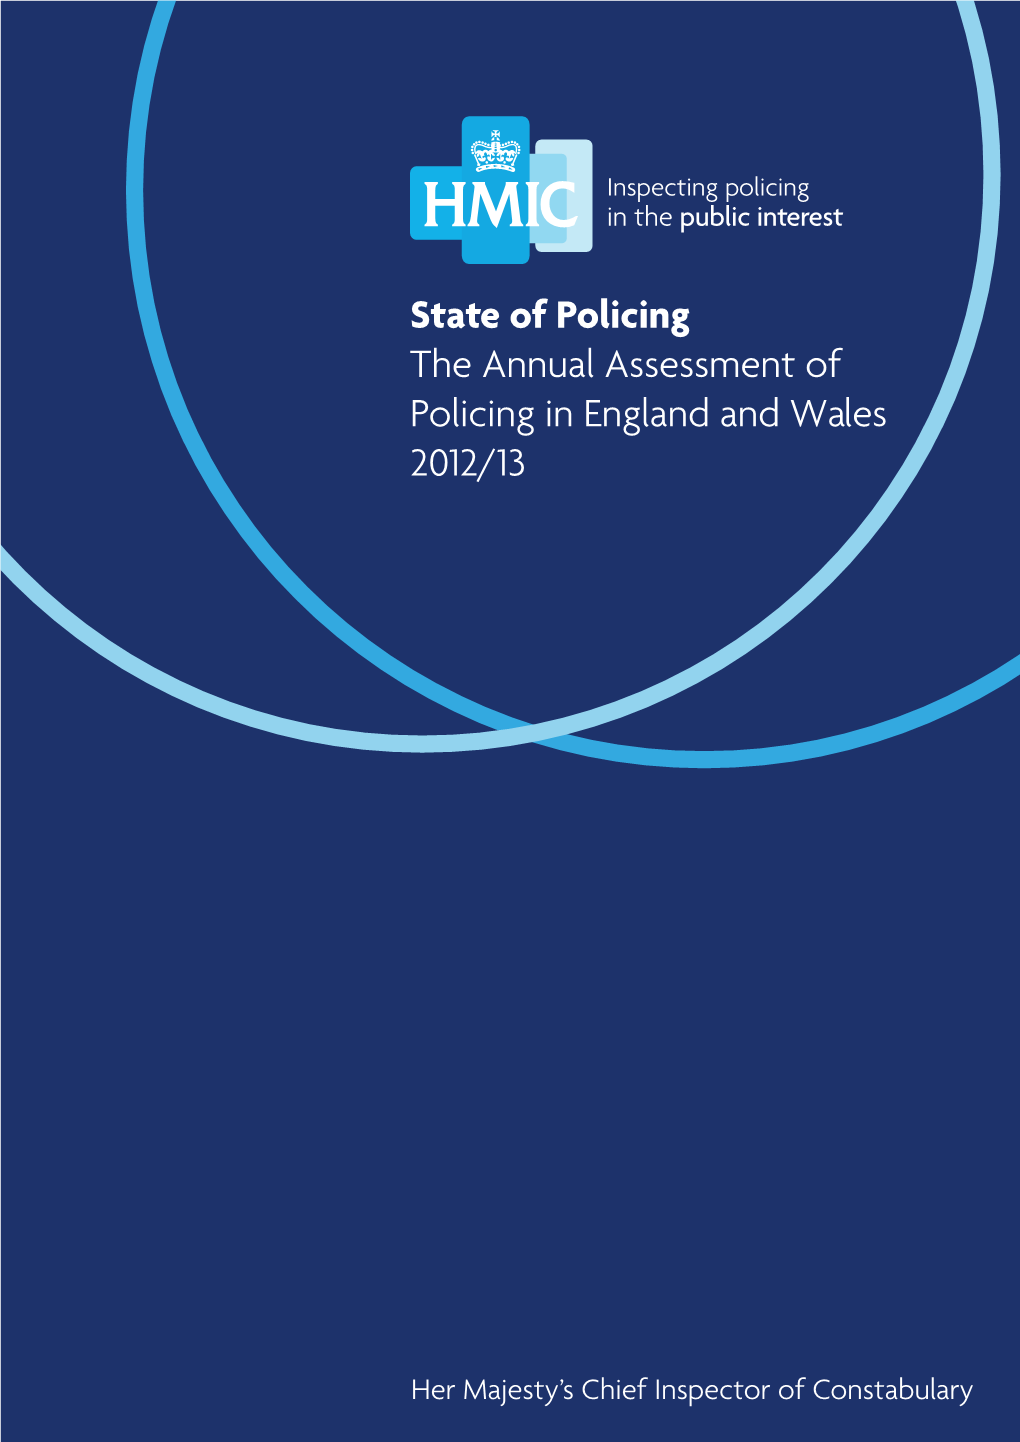 The Annual Assessment of Policing in England and Wales 2012/13